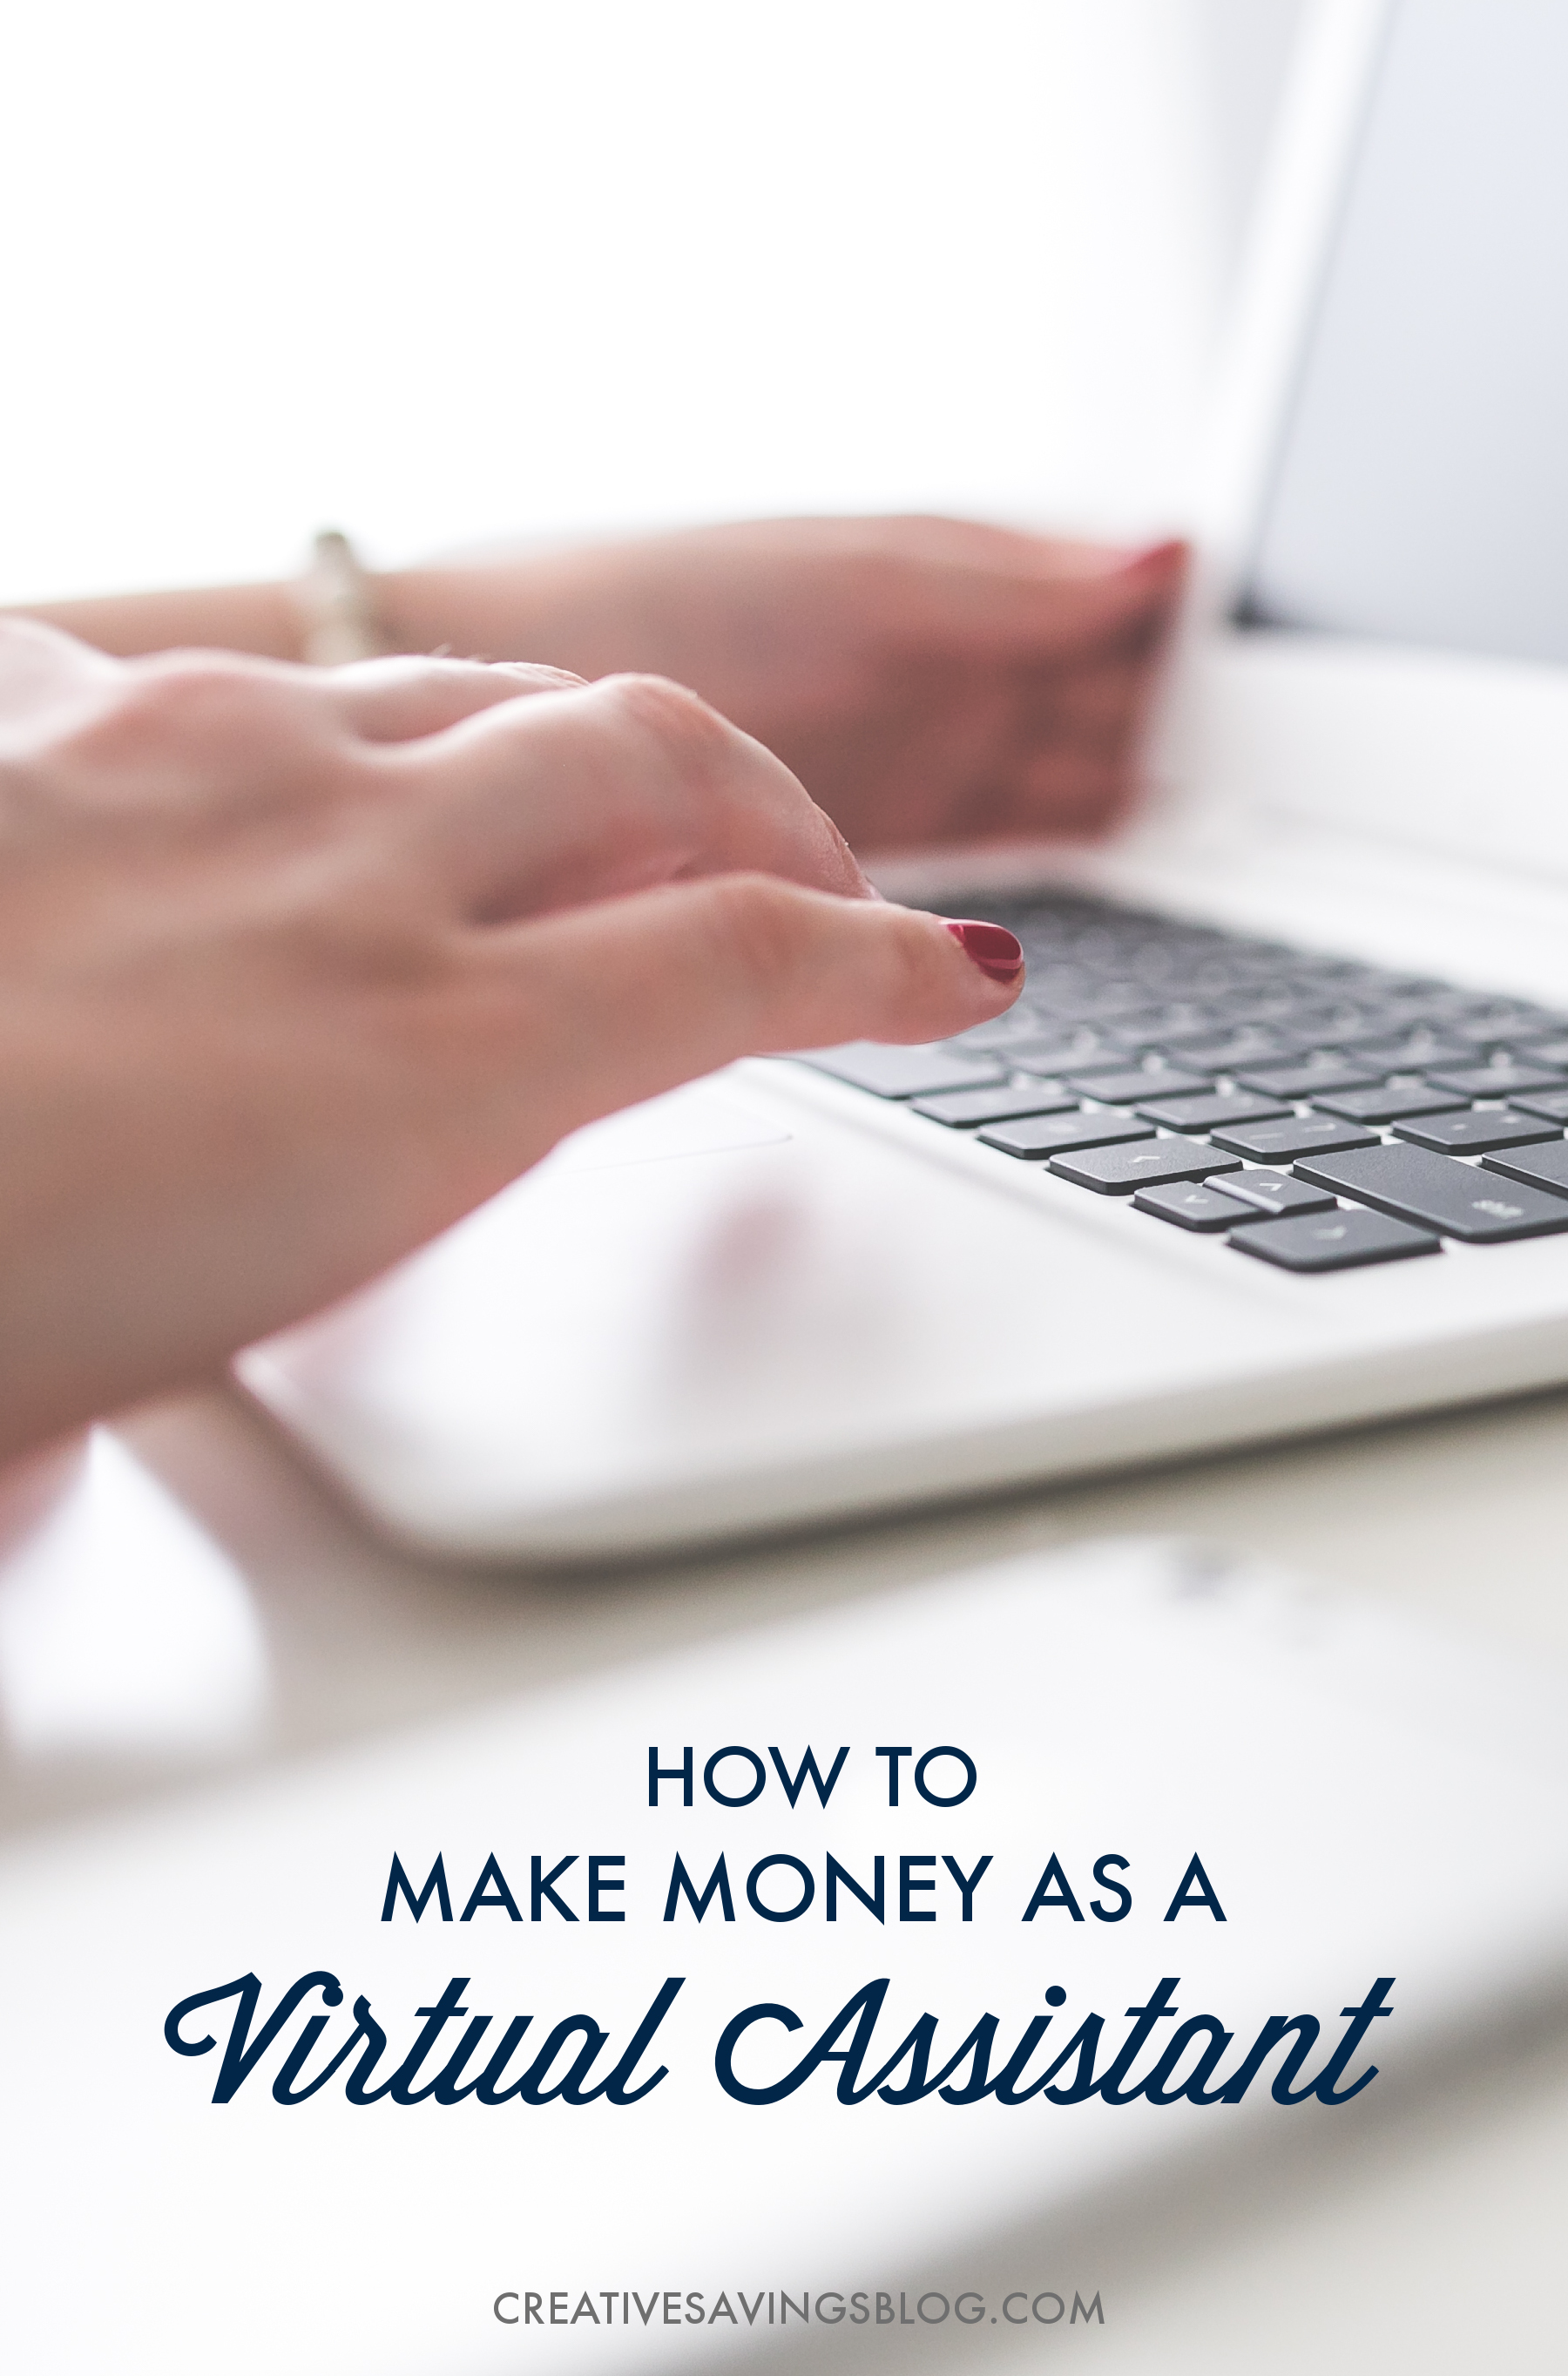 Virtual Assisting is flexible, fun, and one of the best ways to earn extra income from home! Whether you need a little extra spending money, or want to help out your family's bottom line, this in-depth post has everything you need to get started, including where to find your first job.